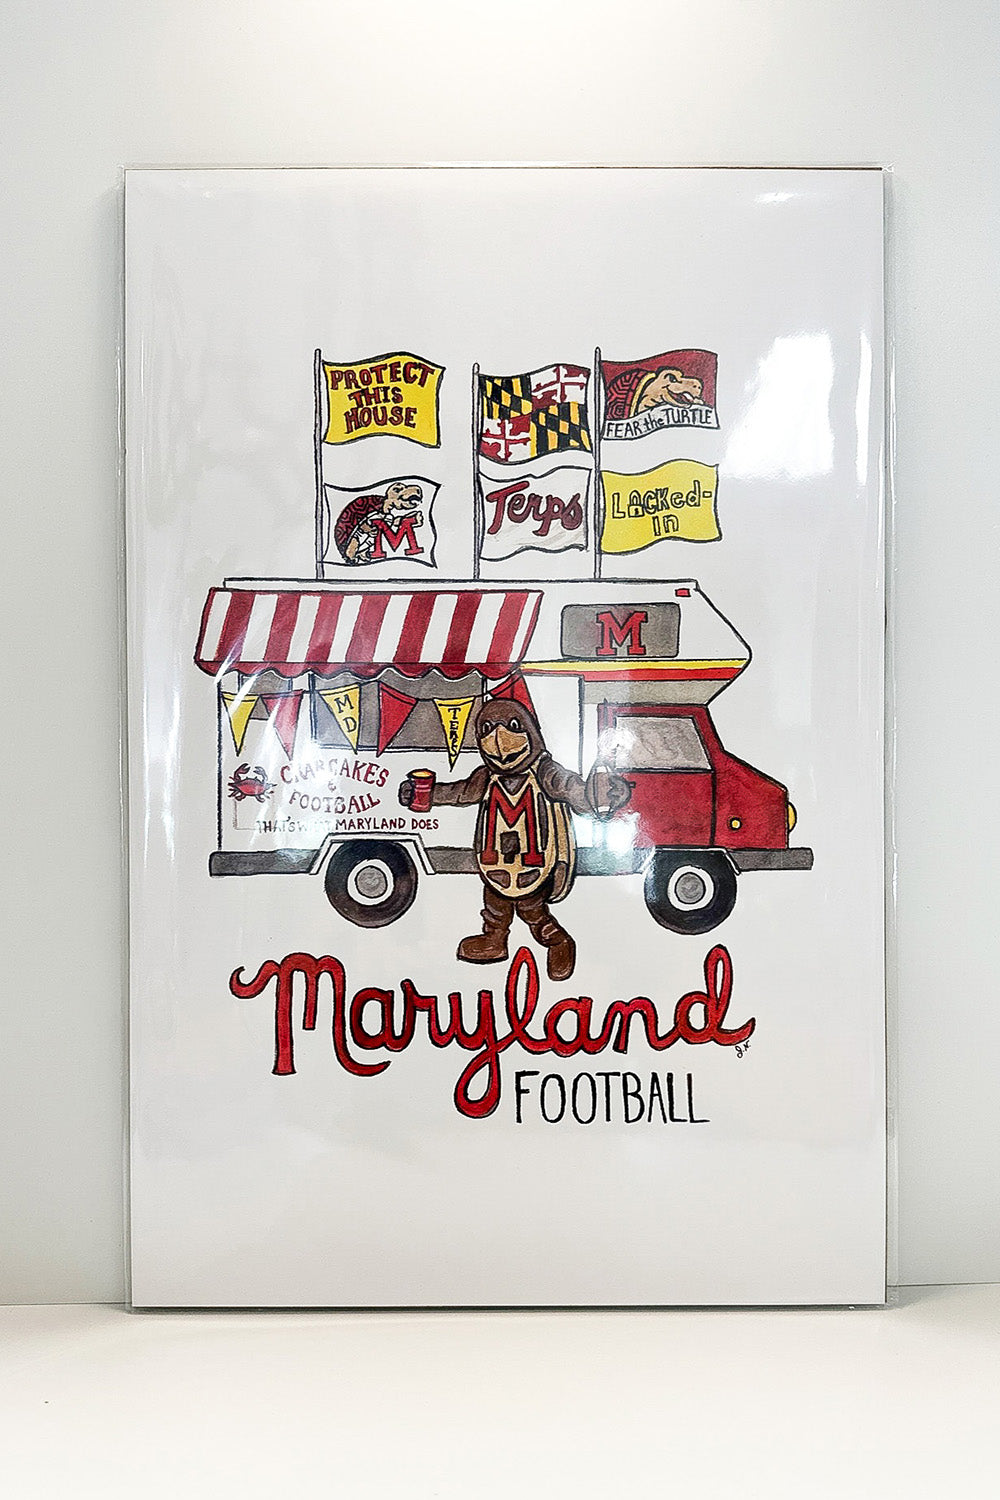 Unframed Collage - University of Maryland Terps Football